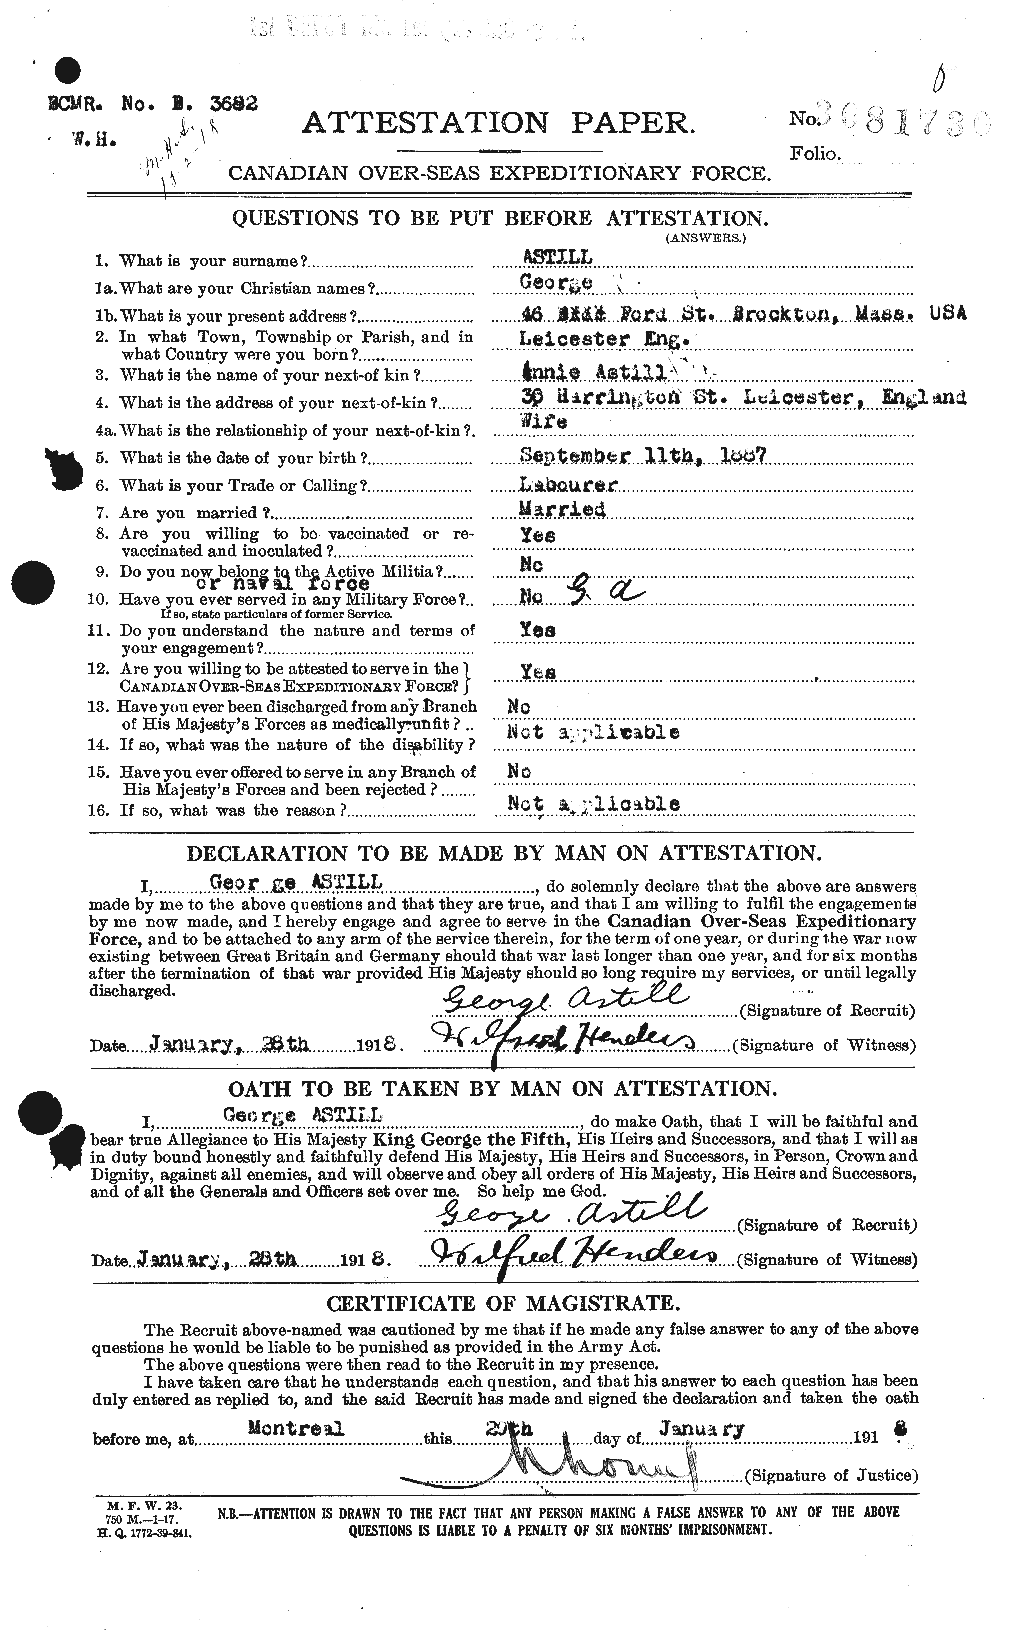 Personnel Records of the First World War - CEF 217144a